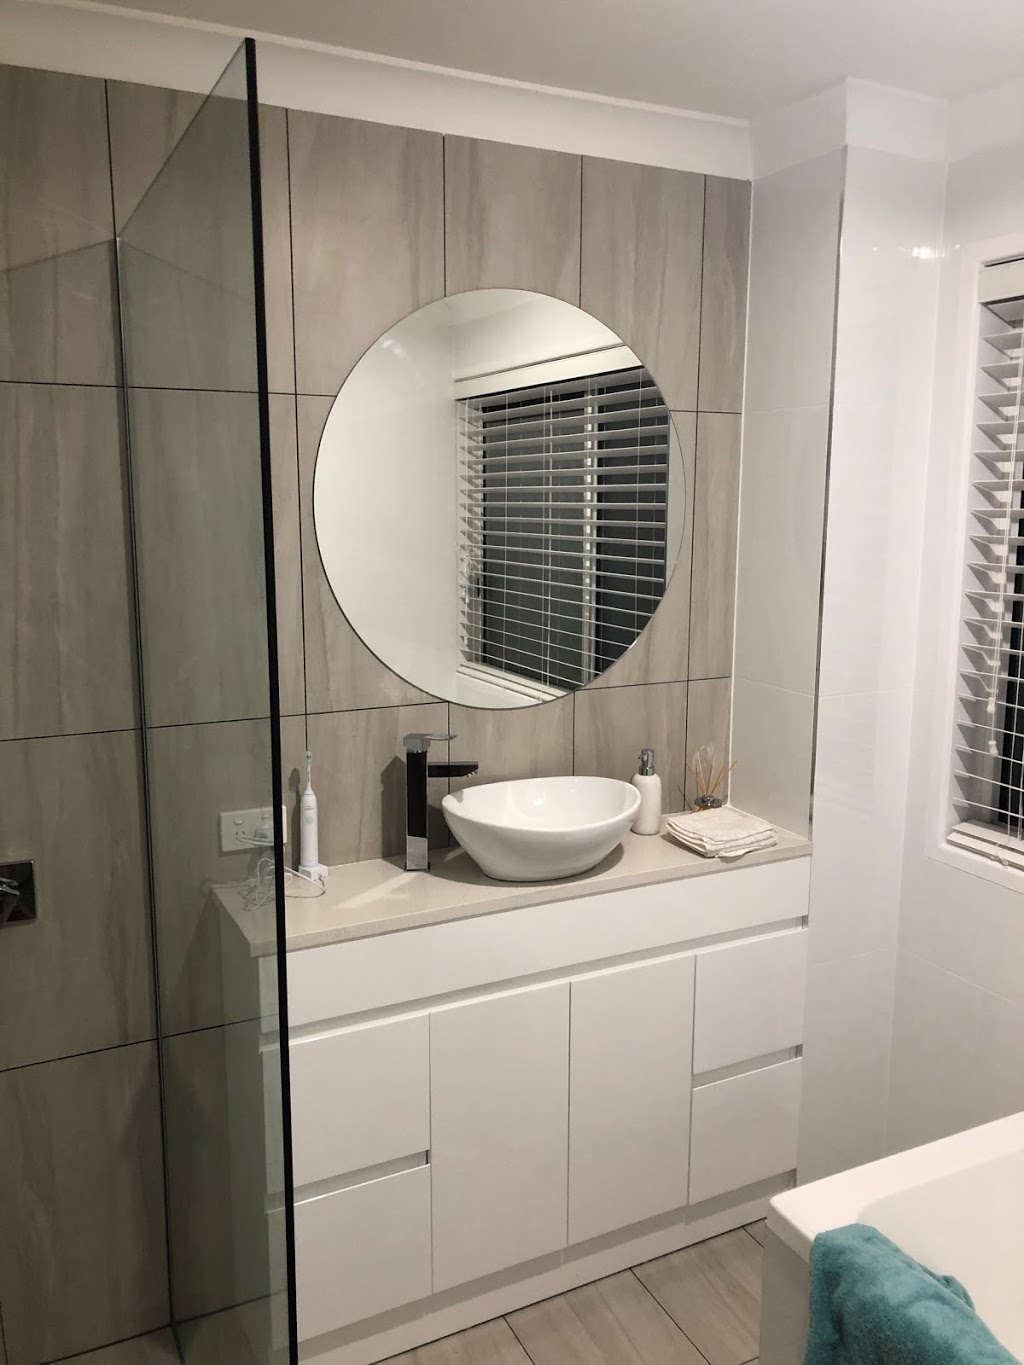 Gold Coast Shower Screens | store | 3/610 Pine Ridge Rd, Coombabah QLD 4216, Australia | 1300199480 OR +61 1300 199 480